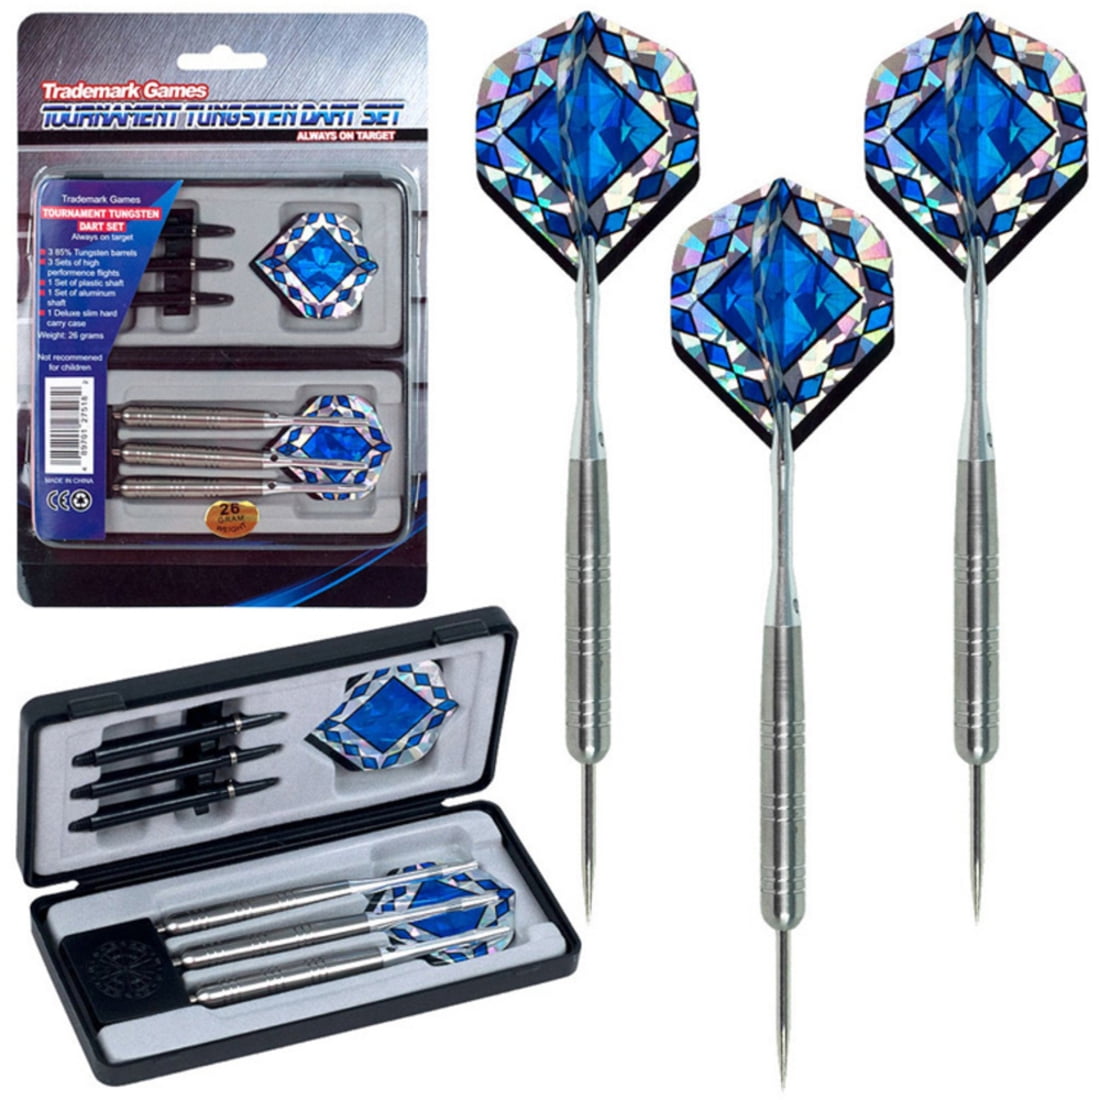 Soft Tips Metallic Dart Flights Polycarbonate Shafts Details about   Lot of 5 ACCUDART NEW 